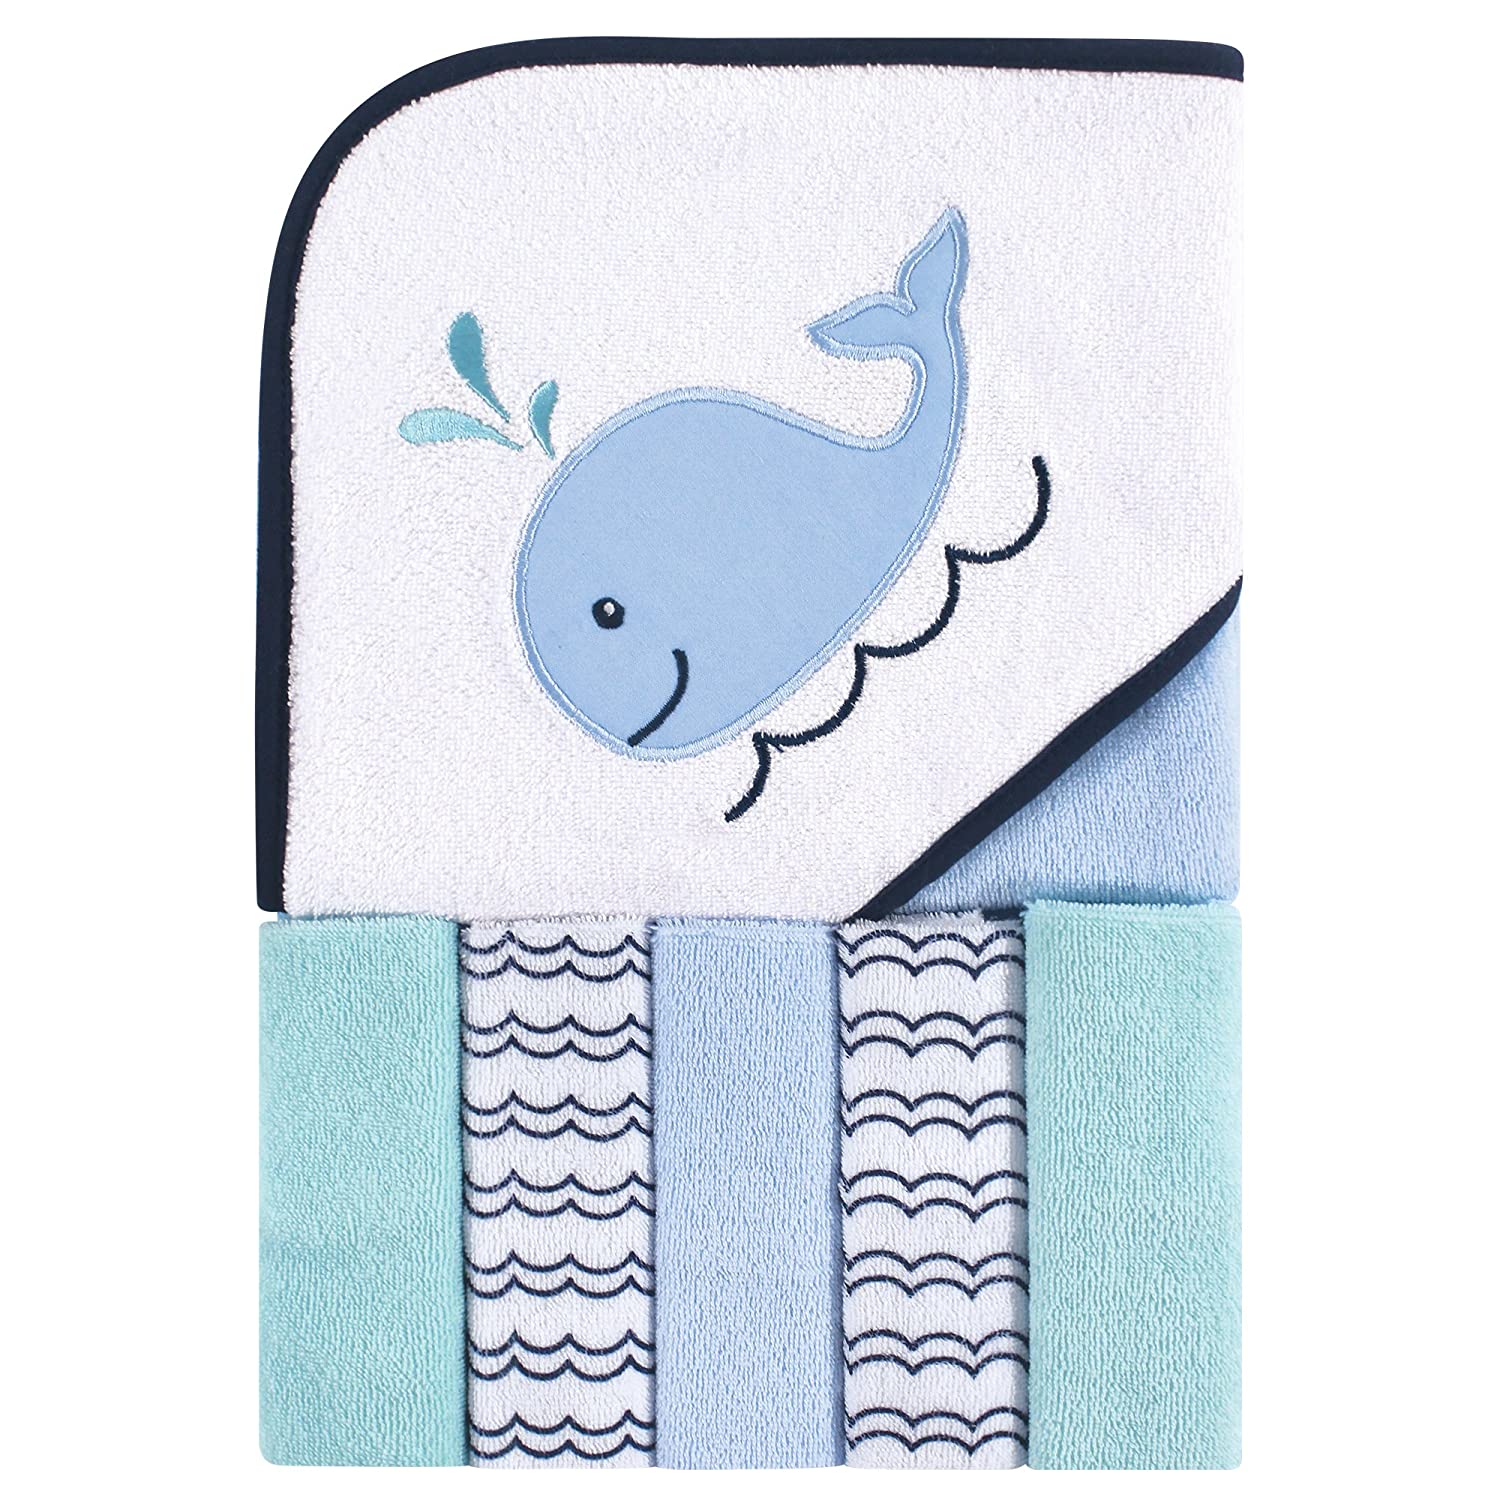 Luvable Friends Unisex Baby Hooded Towel with Five Washcloths, Boy Whale, One Size